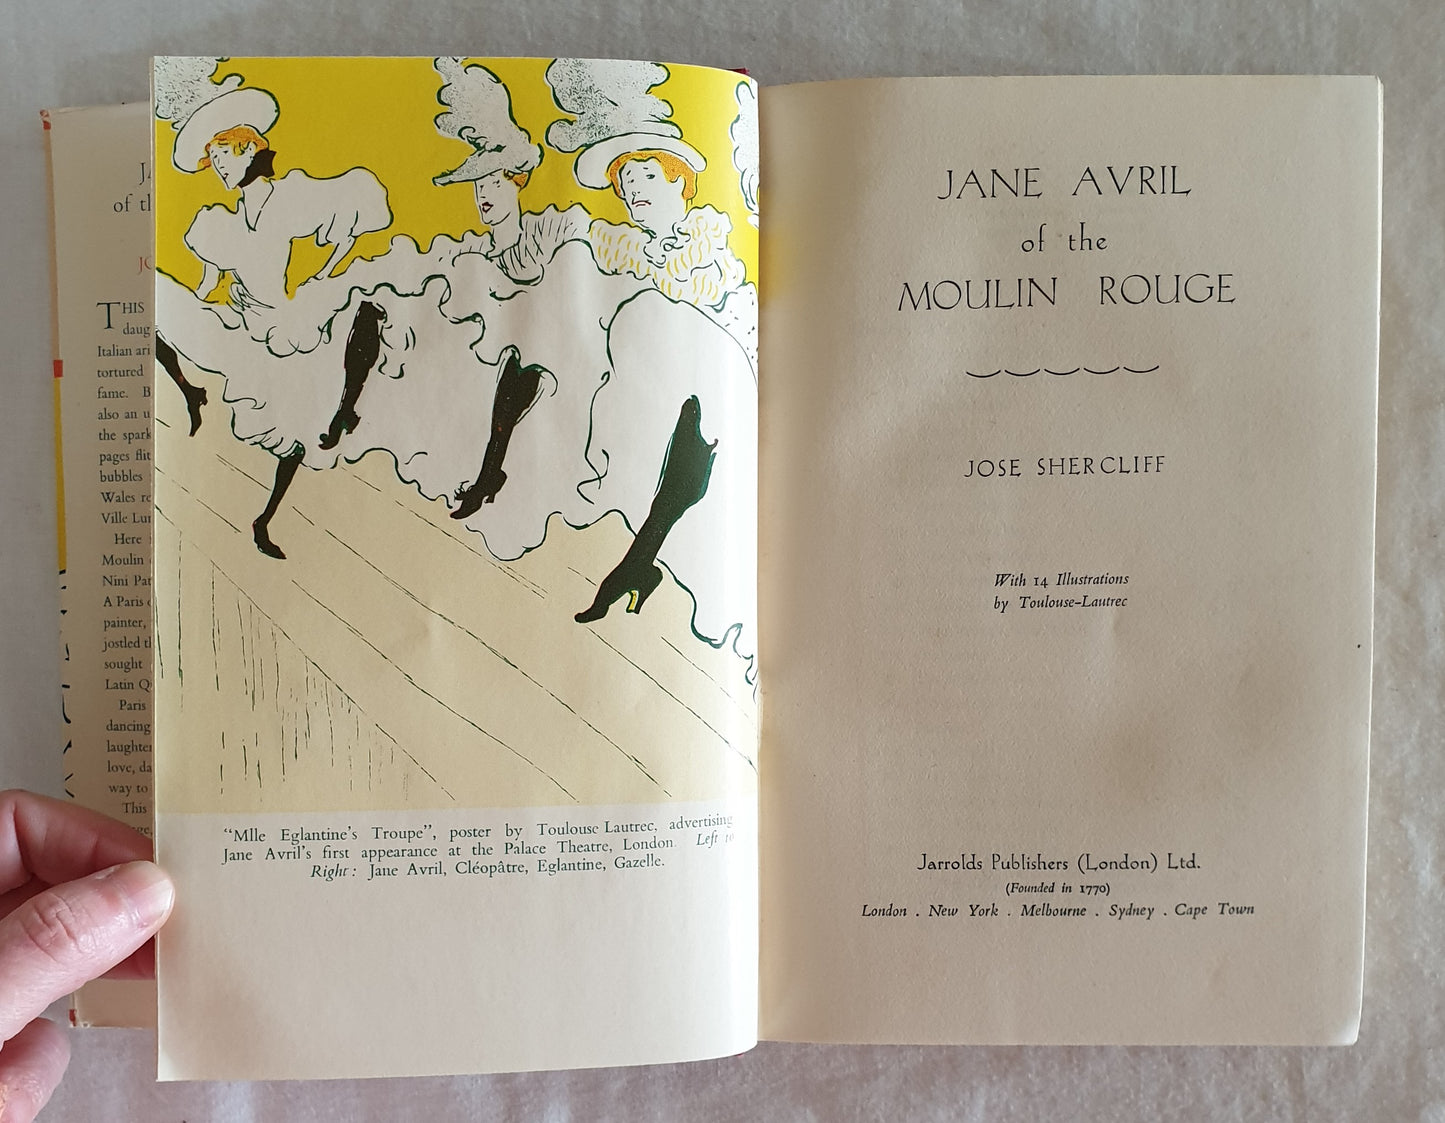 Jane Avril of the Moulin Rouge  by Jose Shercliff  Illustrated by Toulouse-Lautrec